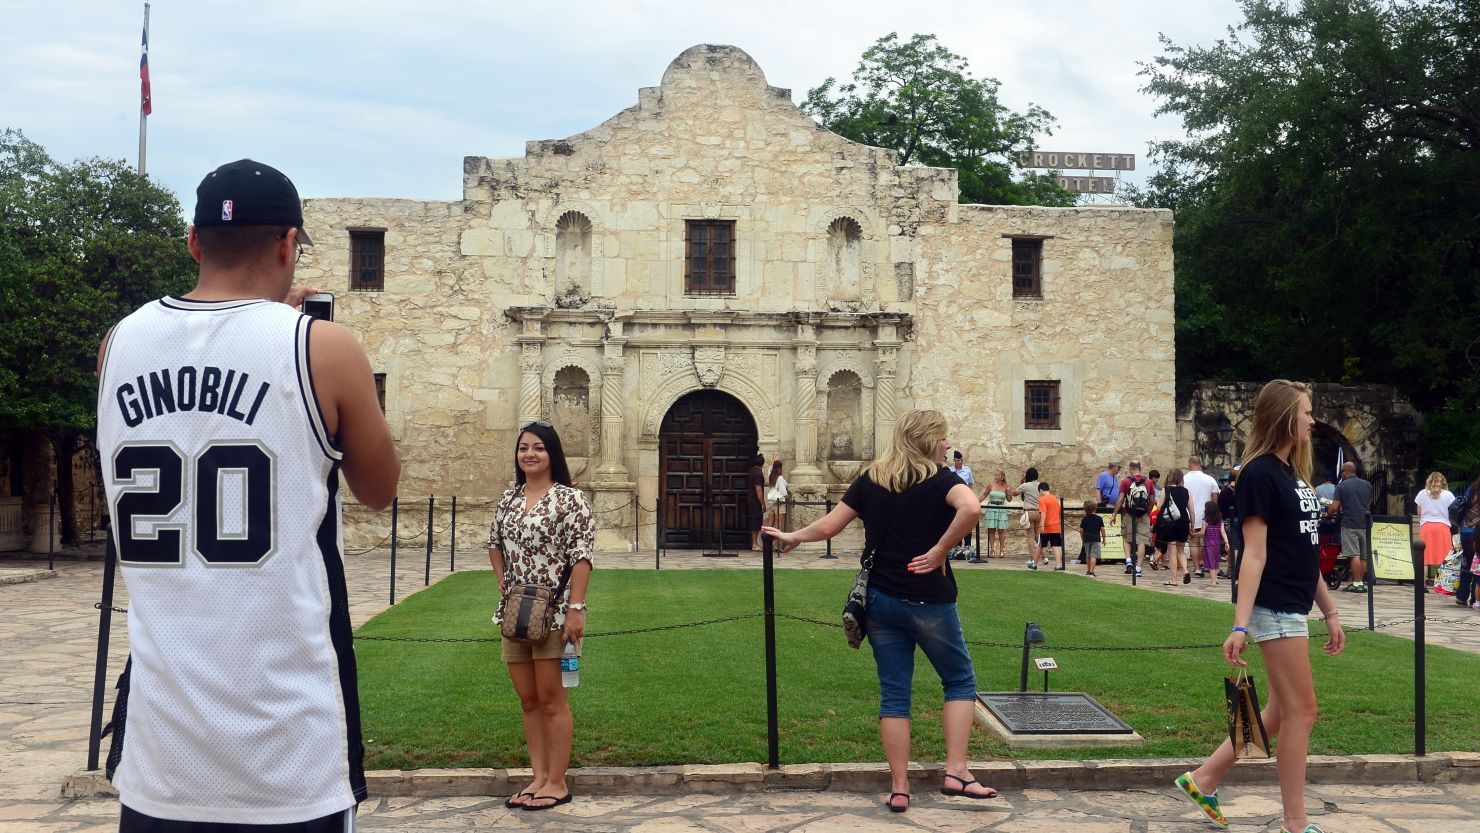 The Alamo is part of the San Antonio Missions system, which was approved as a UNESCO World Heritage site.